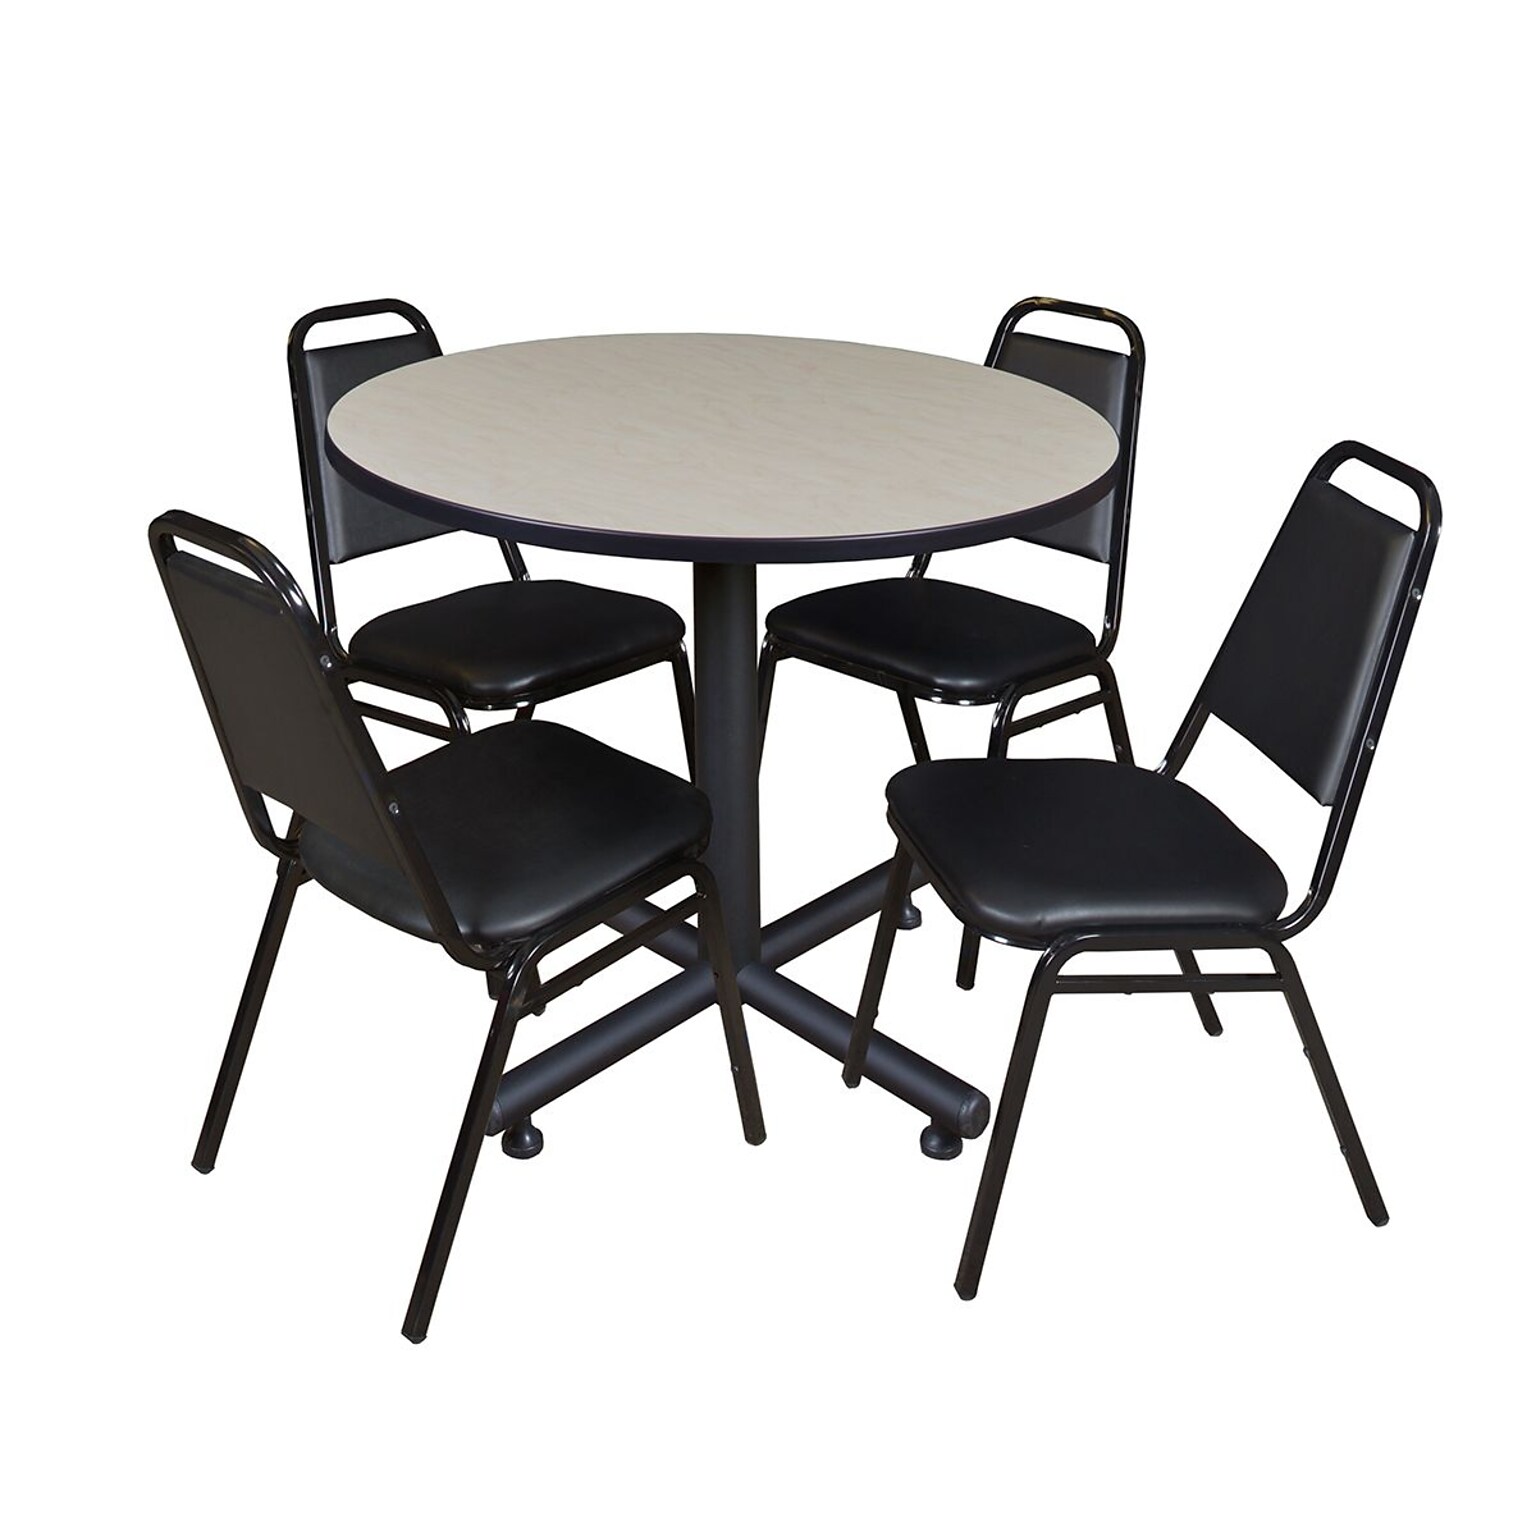 Regency 42-inch Round Laminate Room Tables With 4 Stack Chairs, Maple (TKB42RNDPL29)